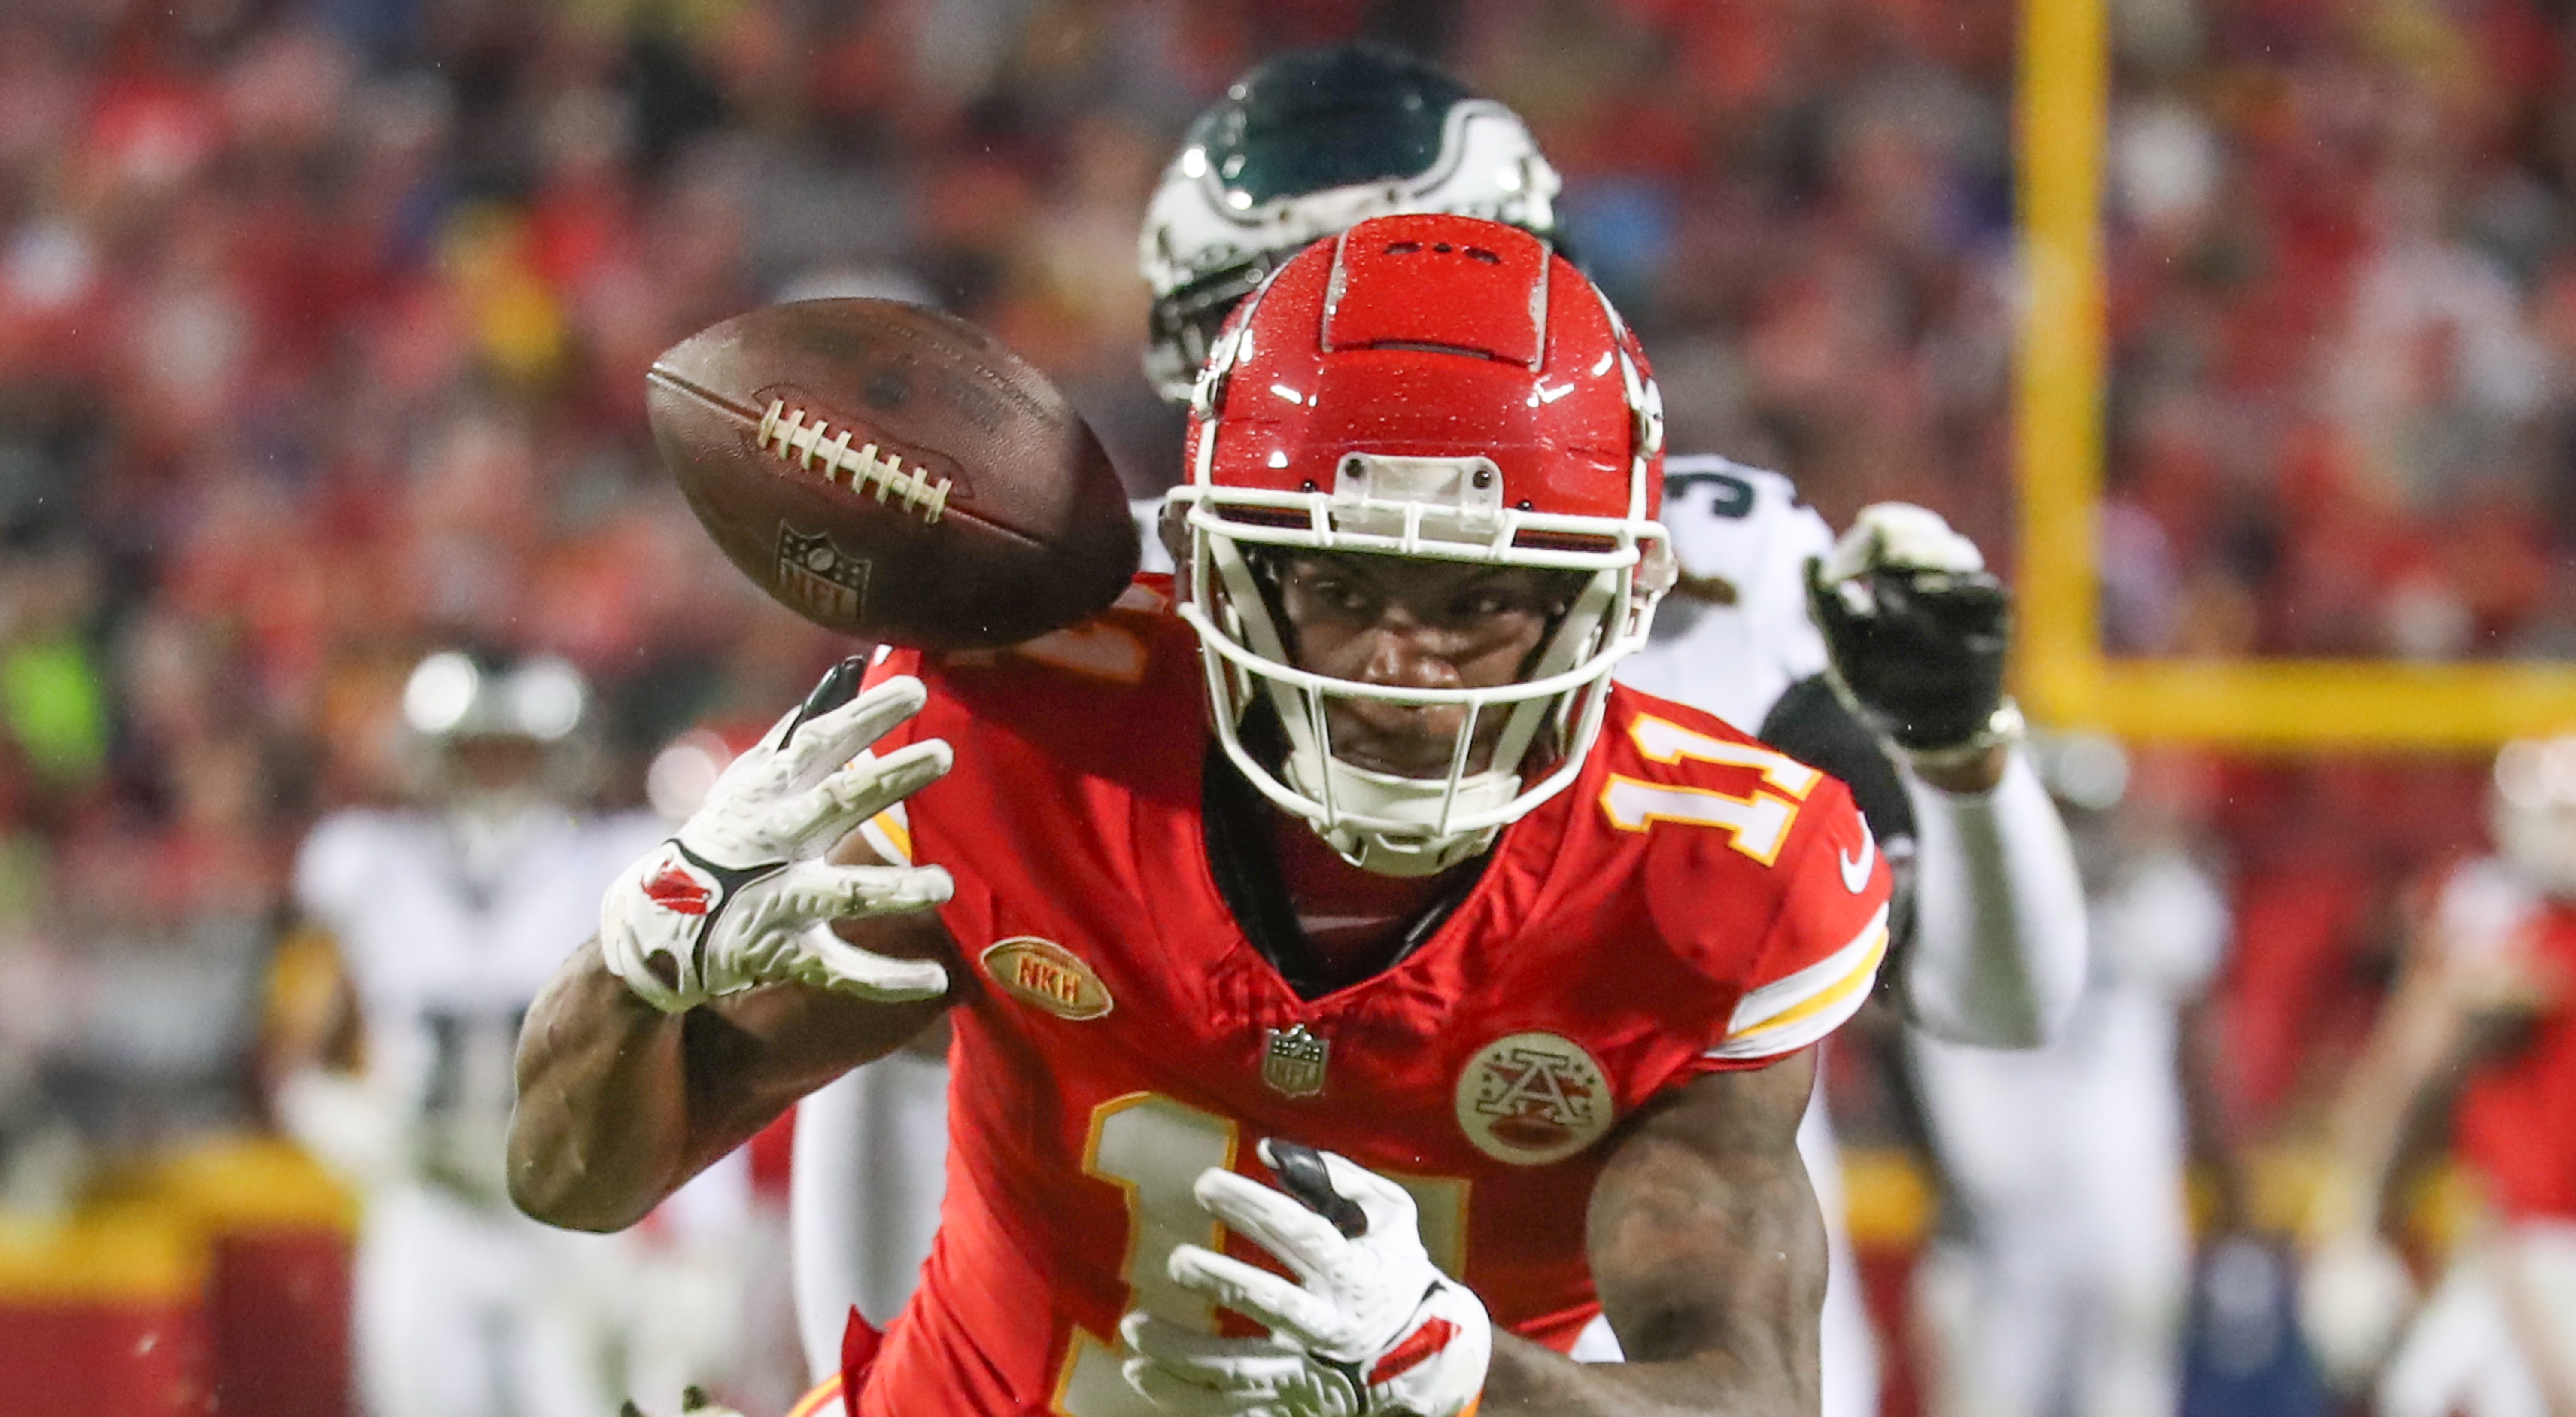 NFL World Left Stunned by Valdes-Scantling’s Crucial Drop in Chiefs-Eagles Match” – NBC10 Philadelphia